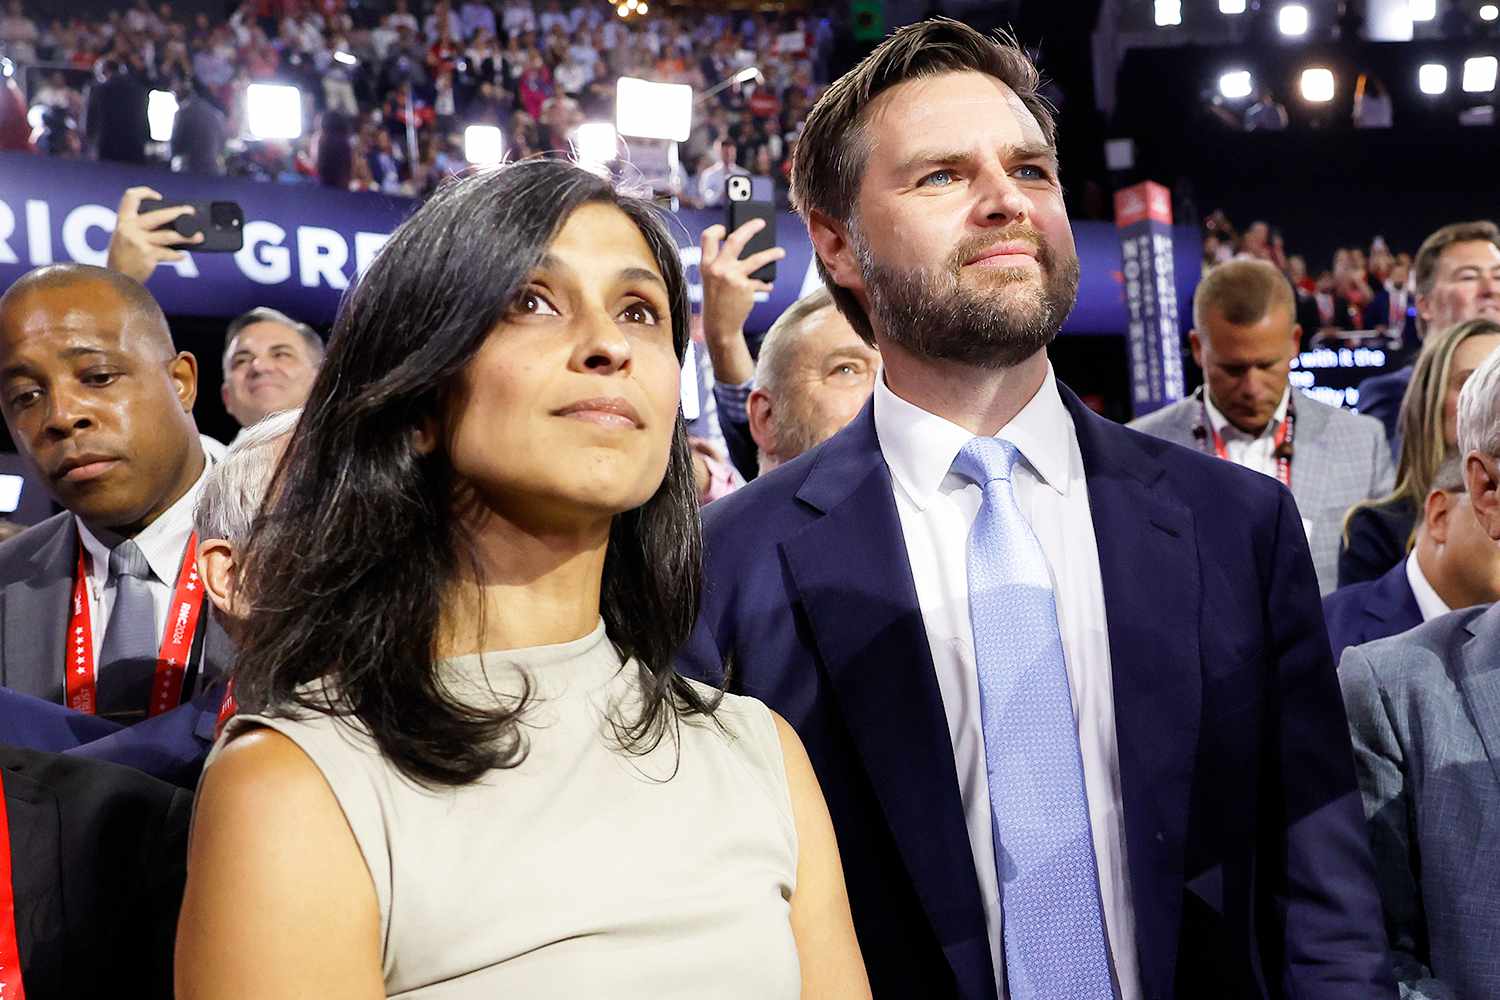 J.D. Vance's Wife Usha Resigns from Powerful Law Job After His VP Nomination, to 'Focus on Caring for Our Family'